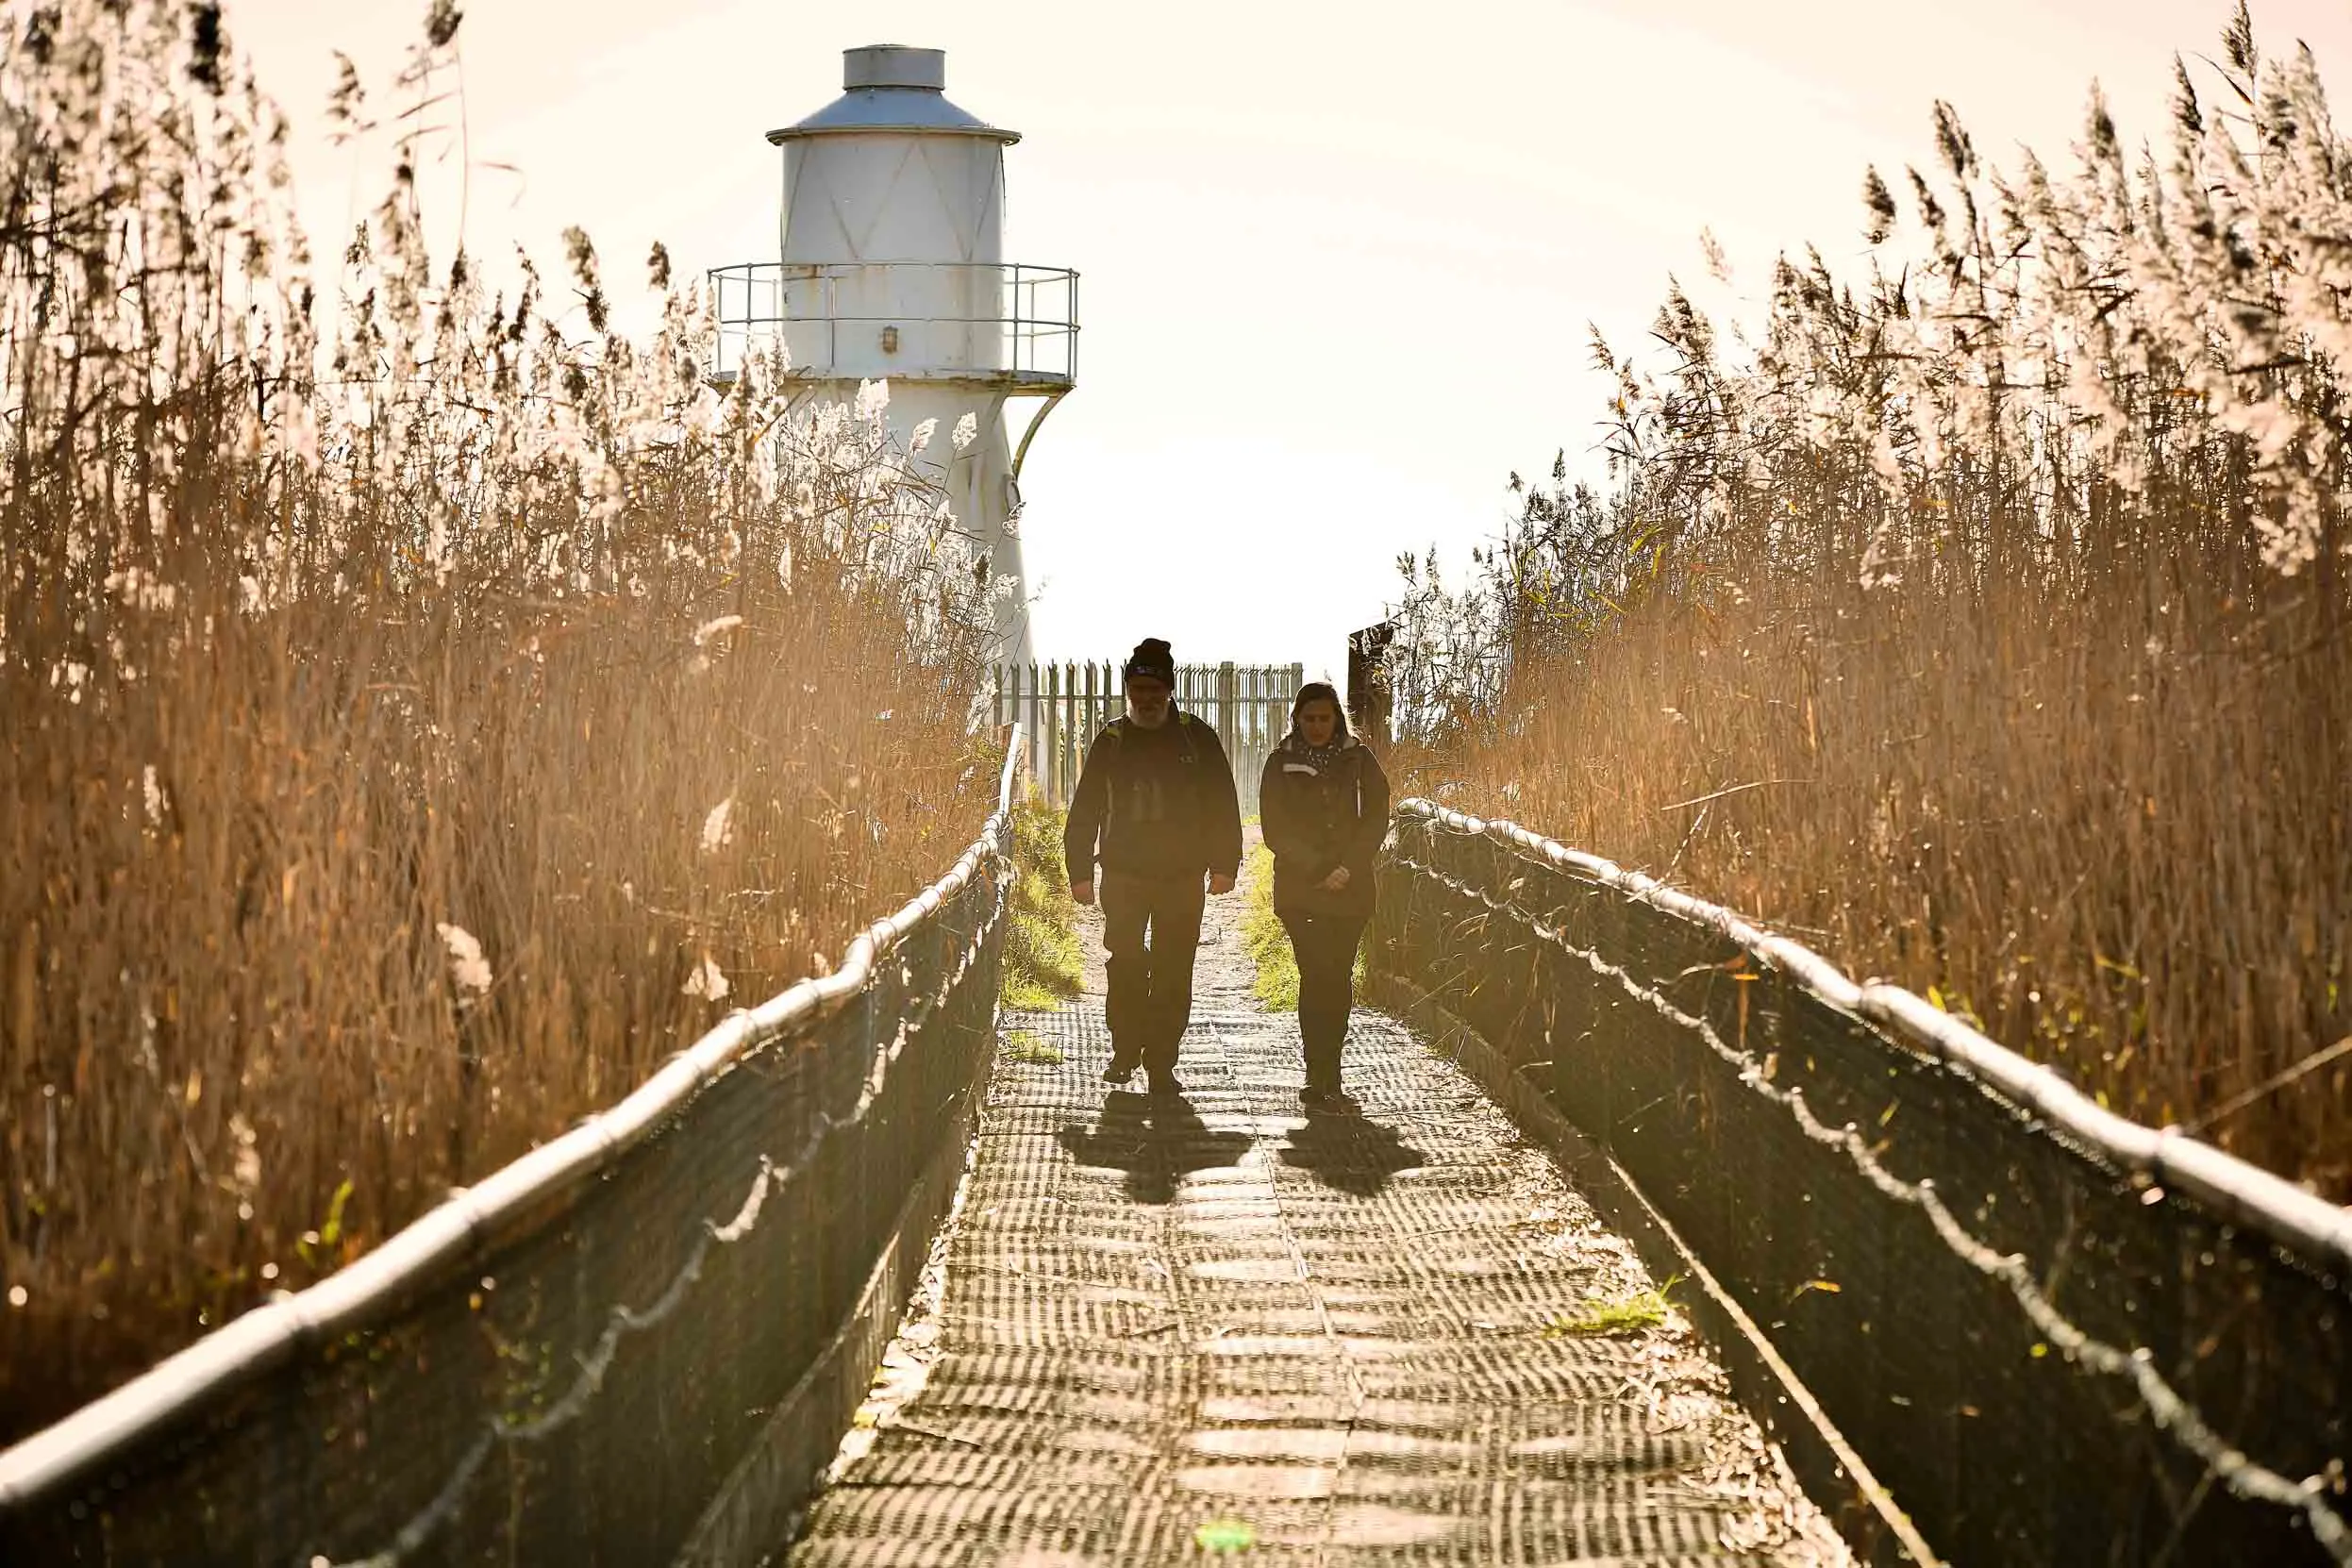 Two visitors walking on a wooden bridge towards the light house at Newport Wetlands, surrounded by reeds.